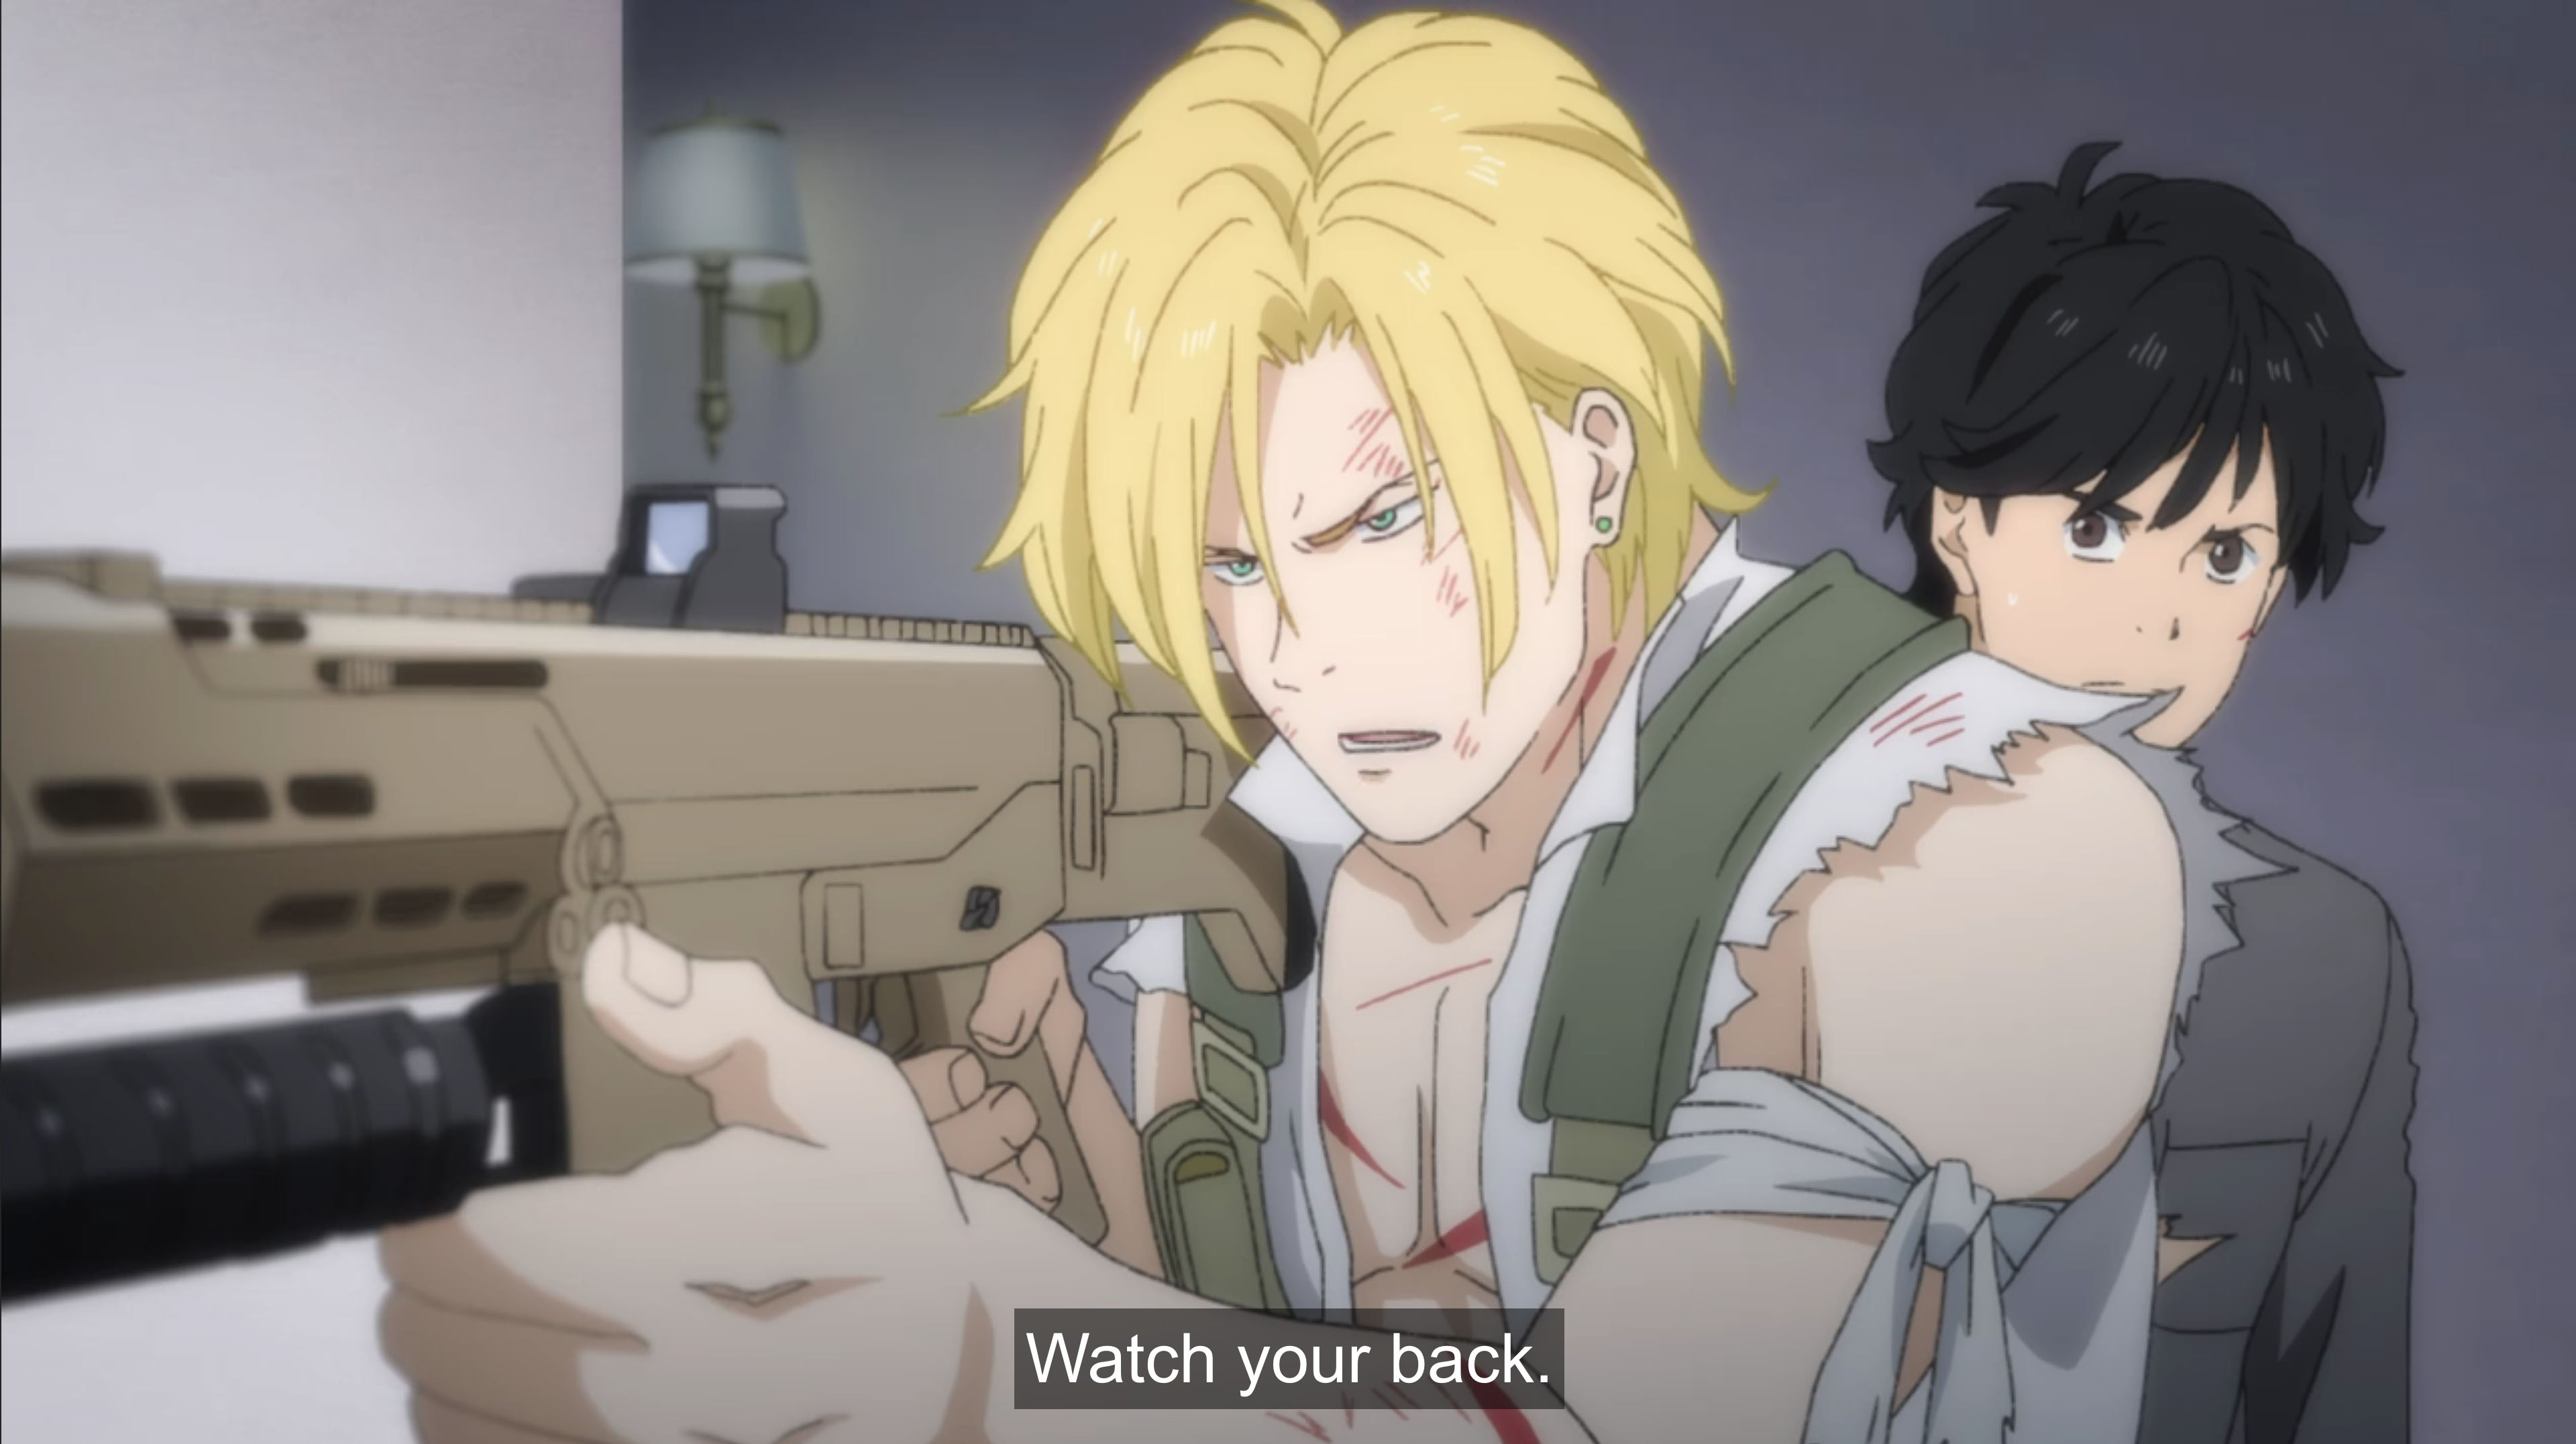 Banana Fish Fans Share Their Thoughts On The Anime 1er Cour Part Iii Otaku She Wrote